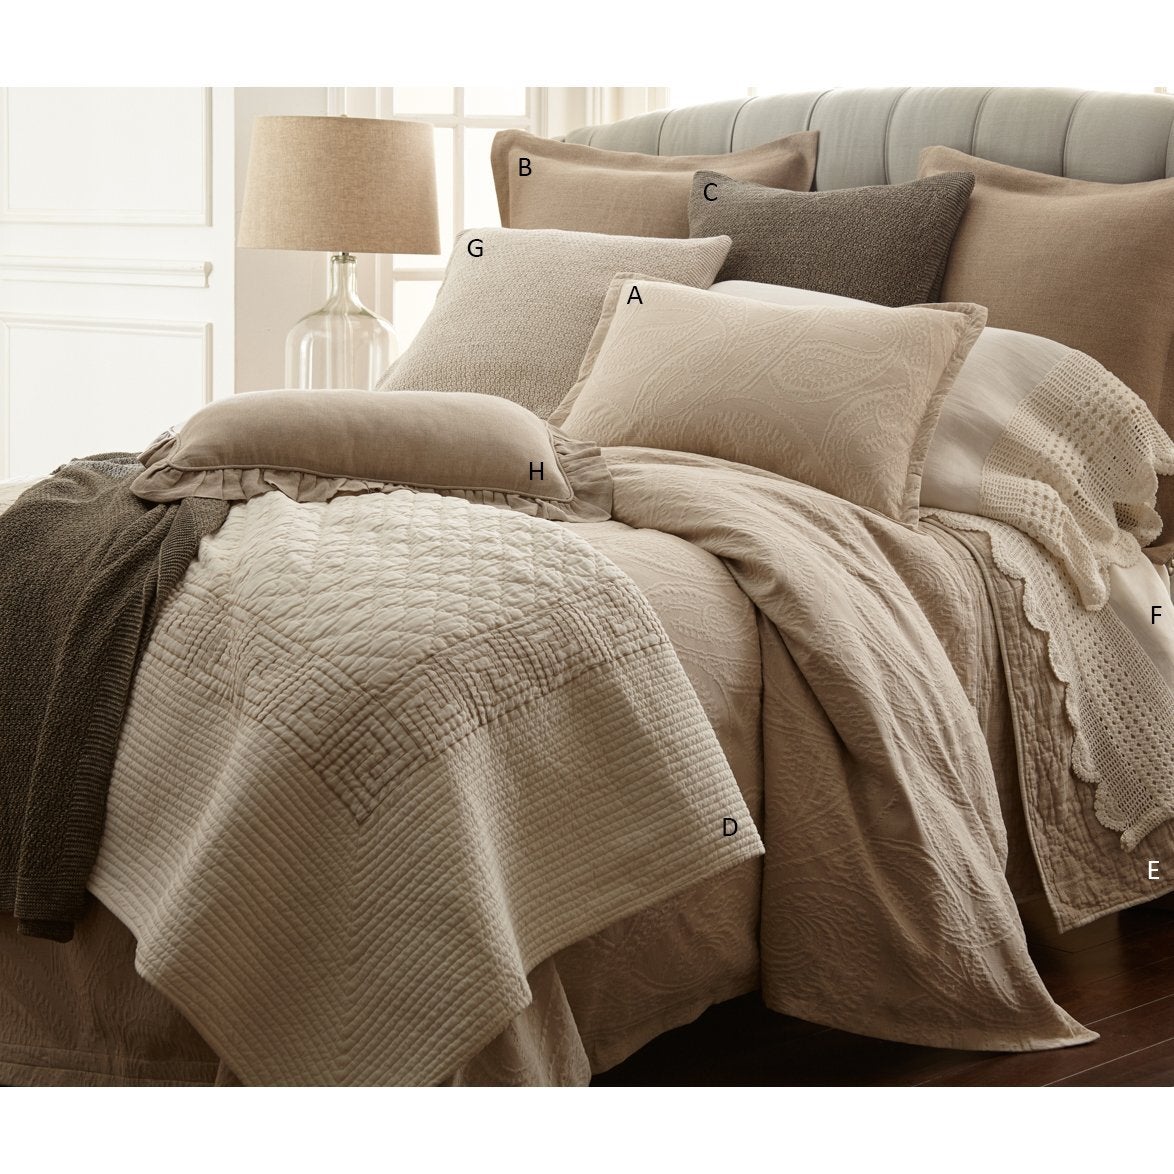 Sale - Quilts & Shams | Amity Home